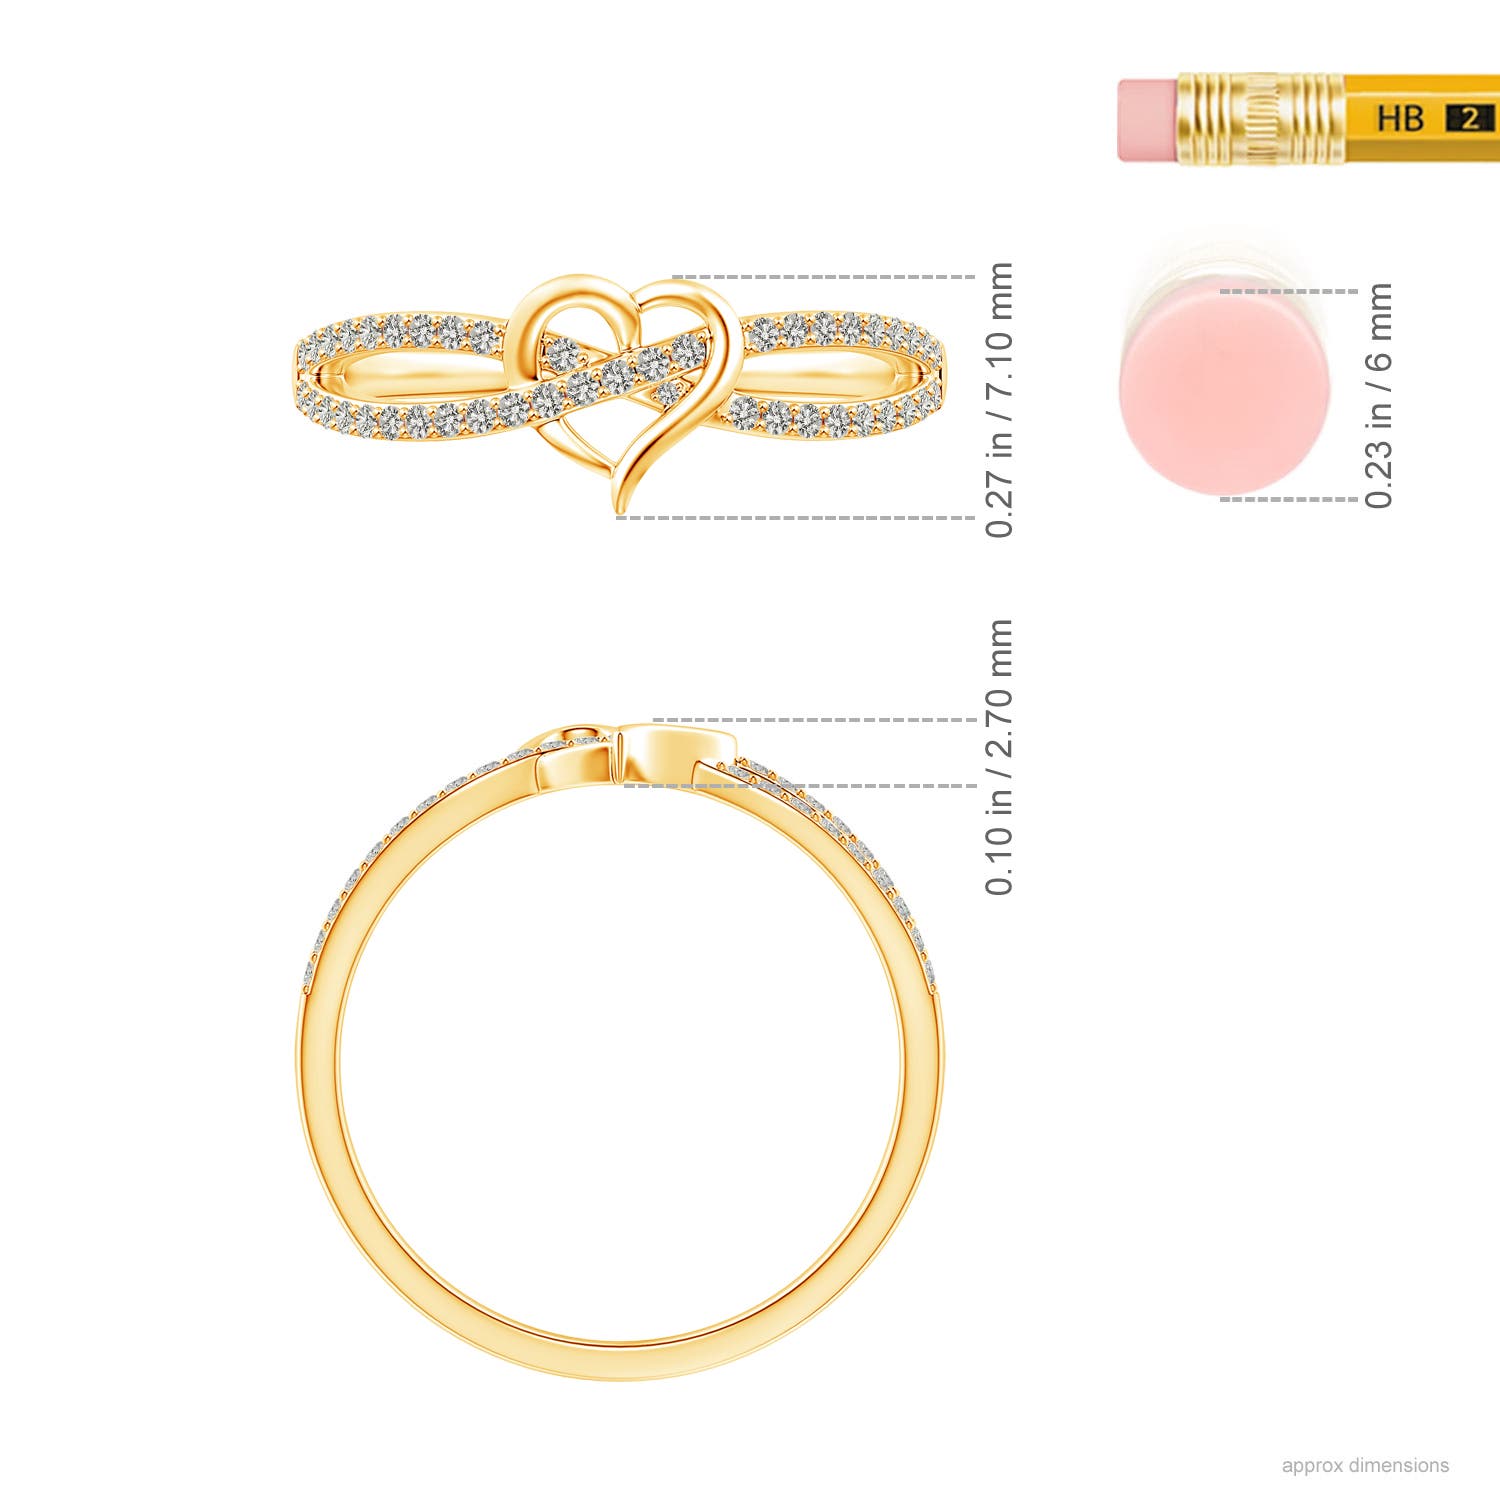 K, I3 / 0.22 CT / 14 KT Yellow Gold